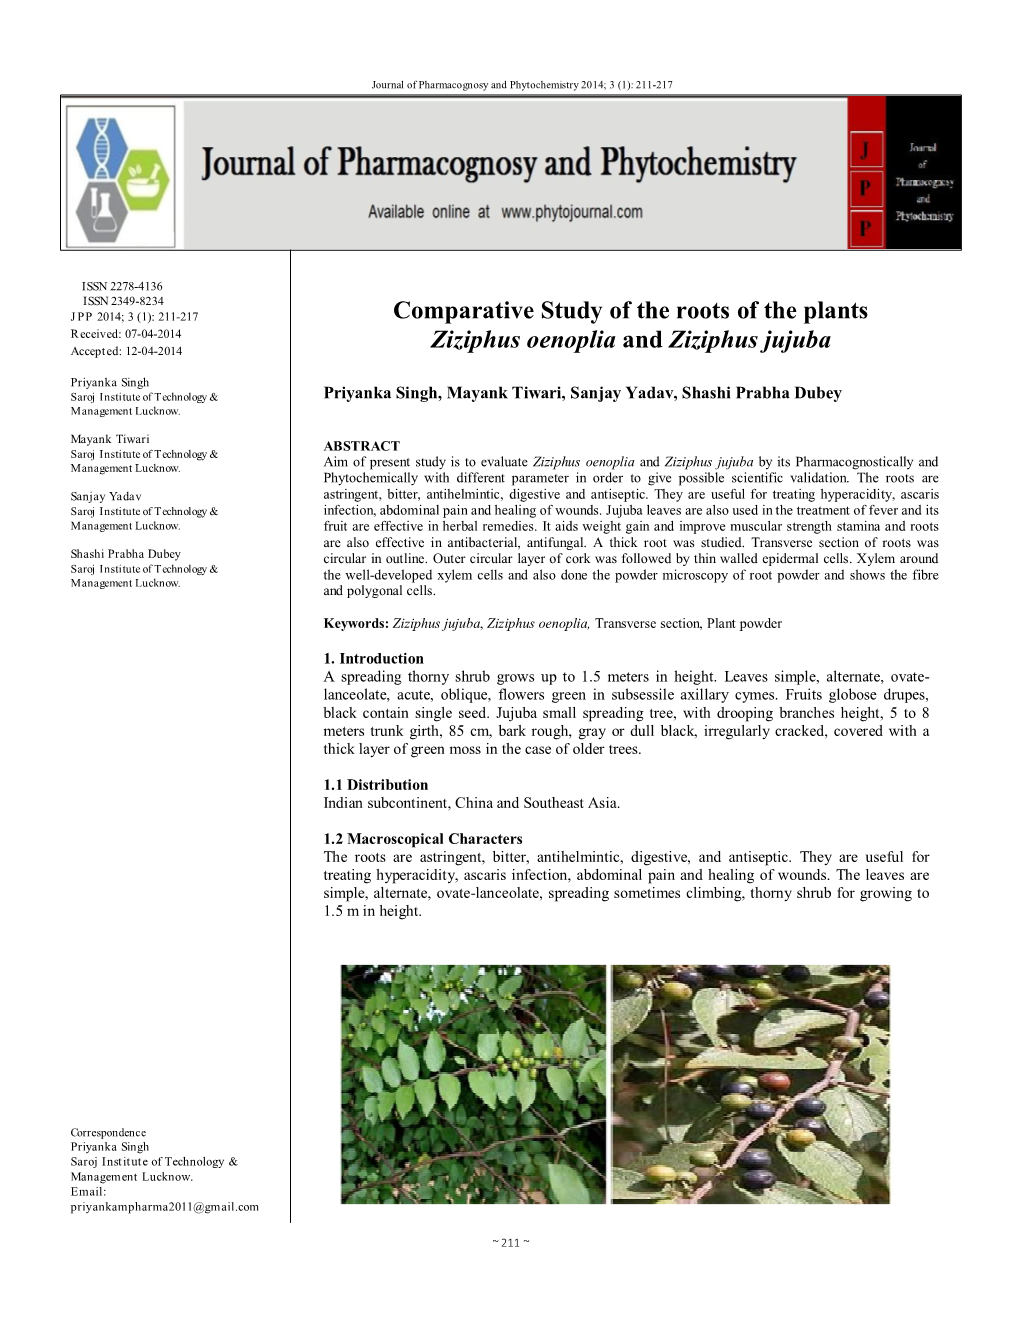 Comparative Study of the Roots of the Plants Ziziphus Oenoplia And